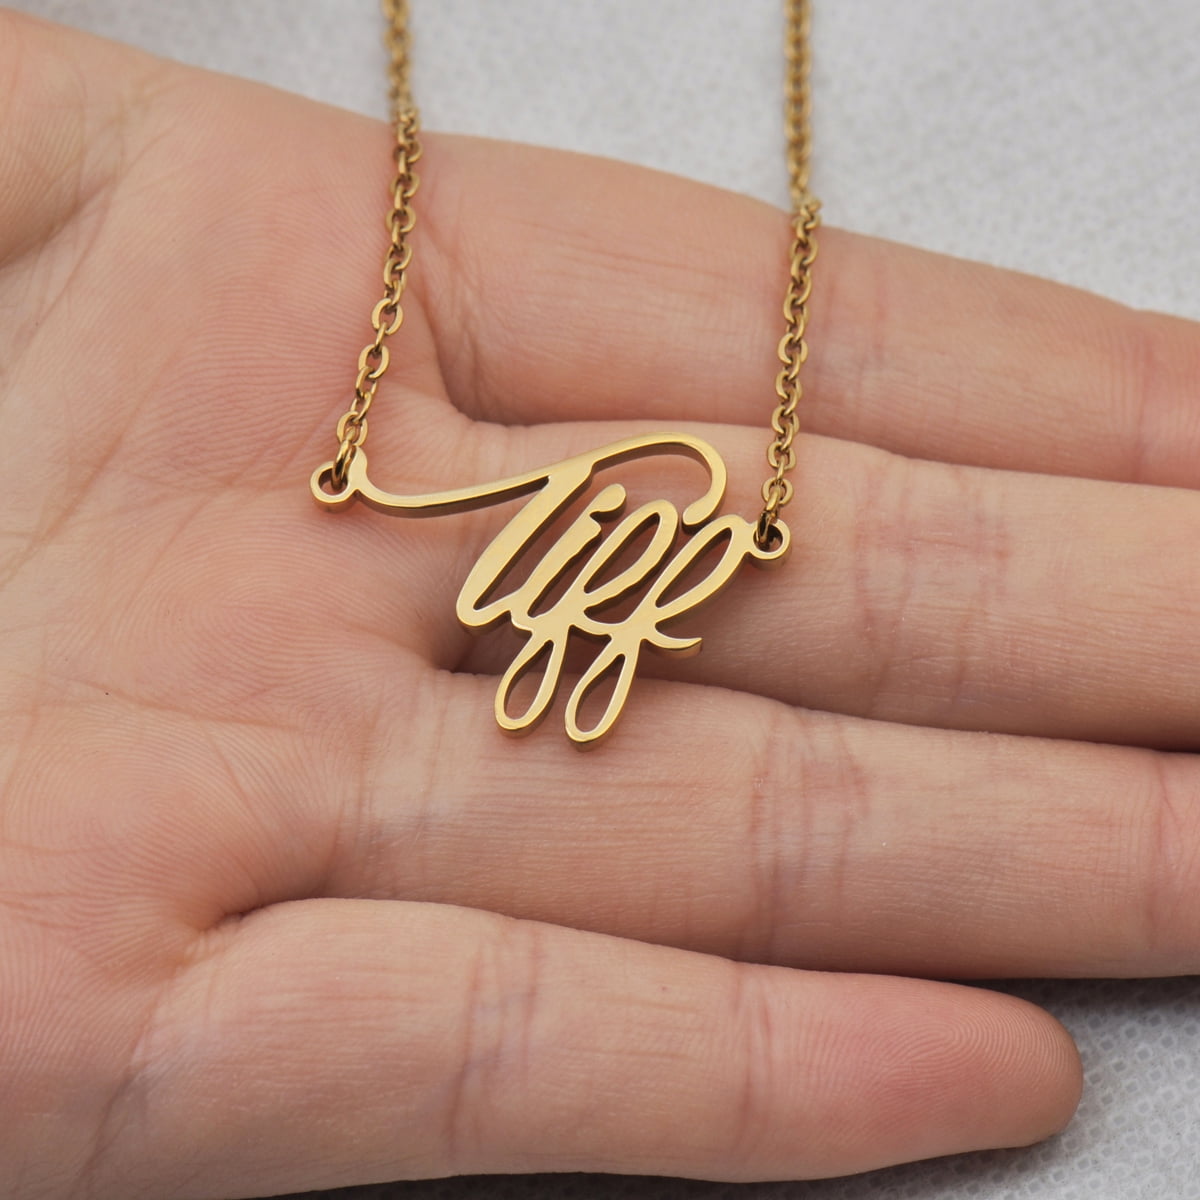 18k Gold Plated Dainty Tiff Name Necklace Pendant Charm Jewlery Mother Day  Gift